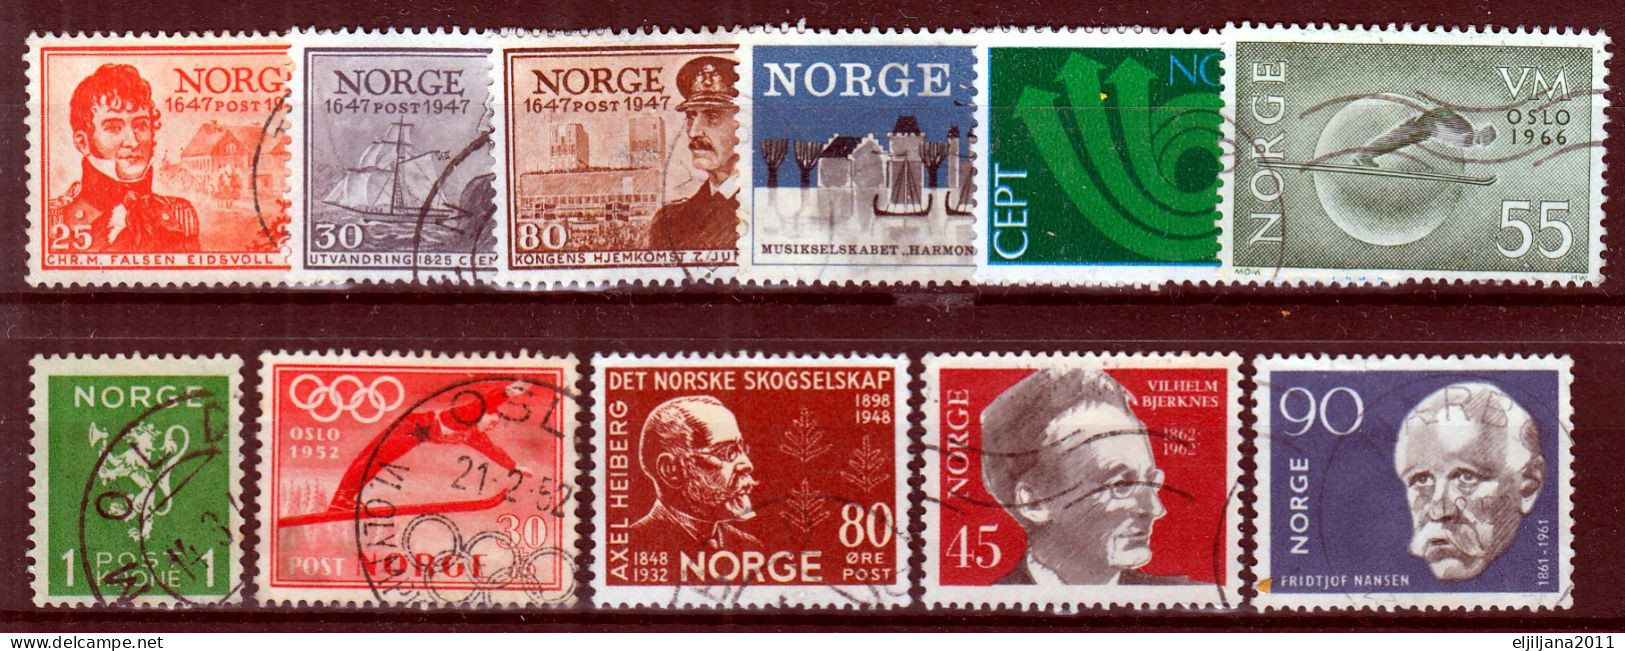 Action !! SALE !! 50 % OFF !! ⁕ Norway / NORGE 1938 - 1966 ⁕ Nice Collection / Lot ⁕ 32v Used - See Scan - Verzamelingen